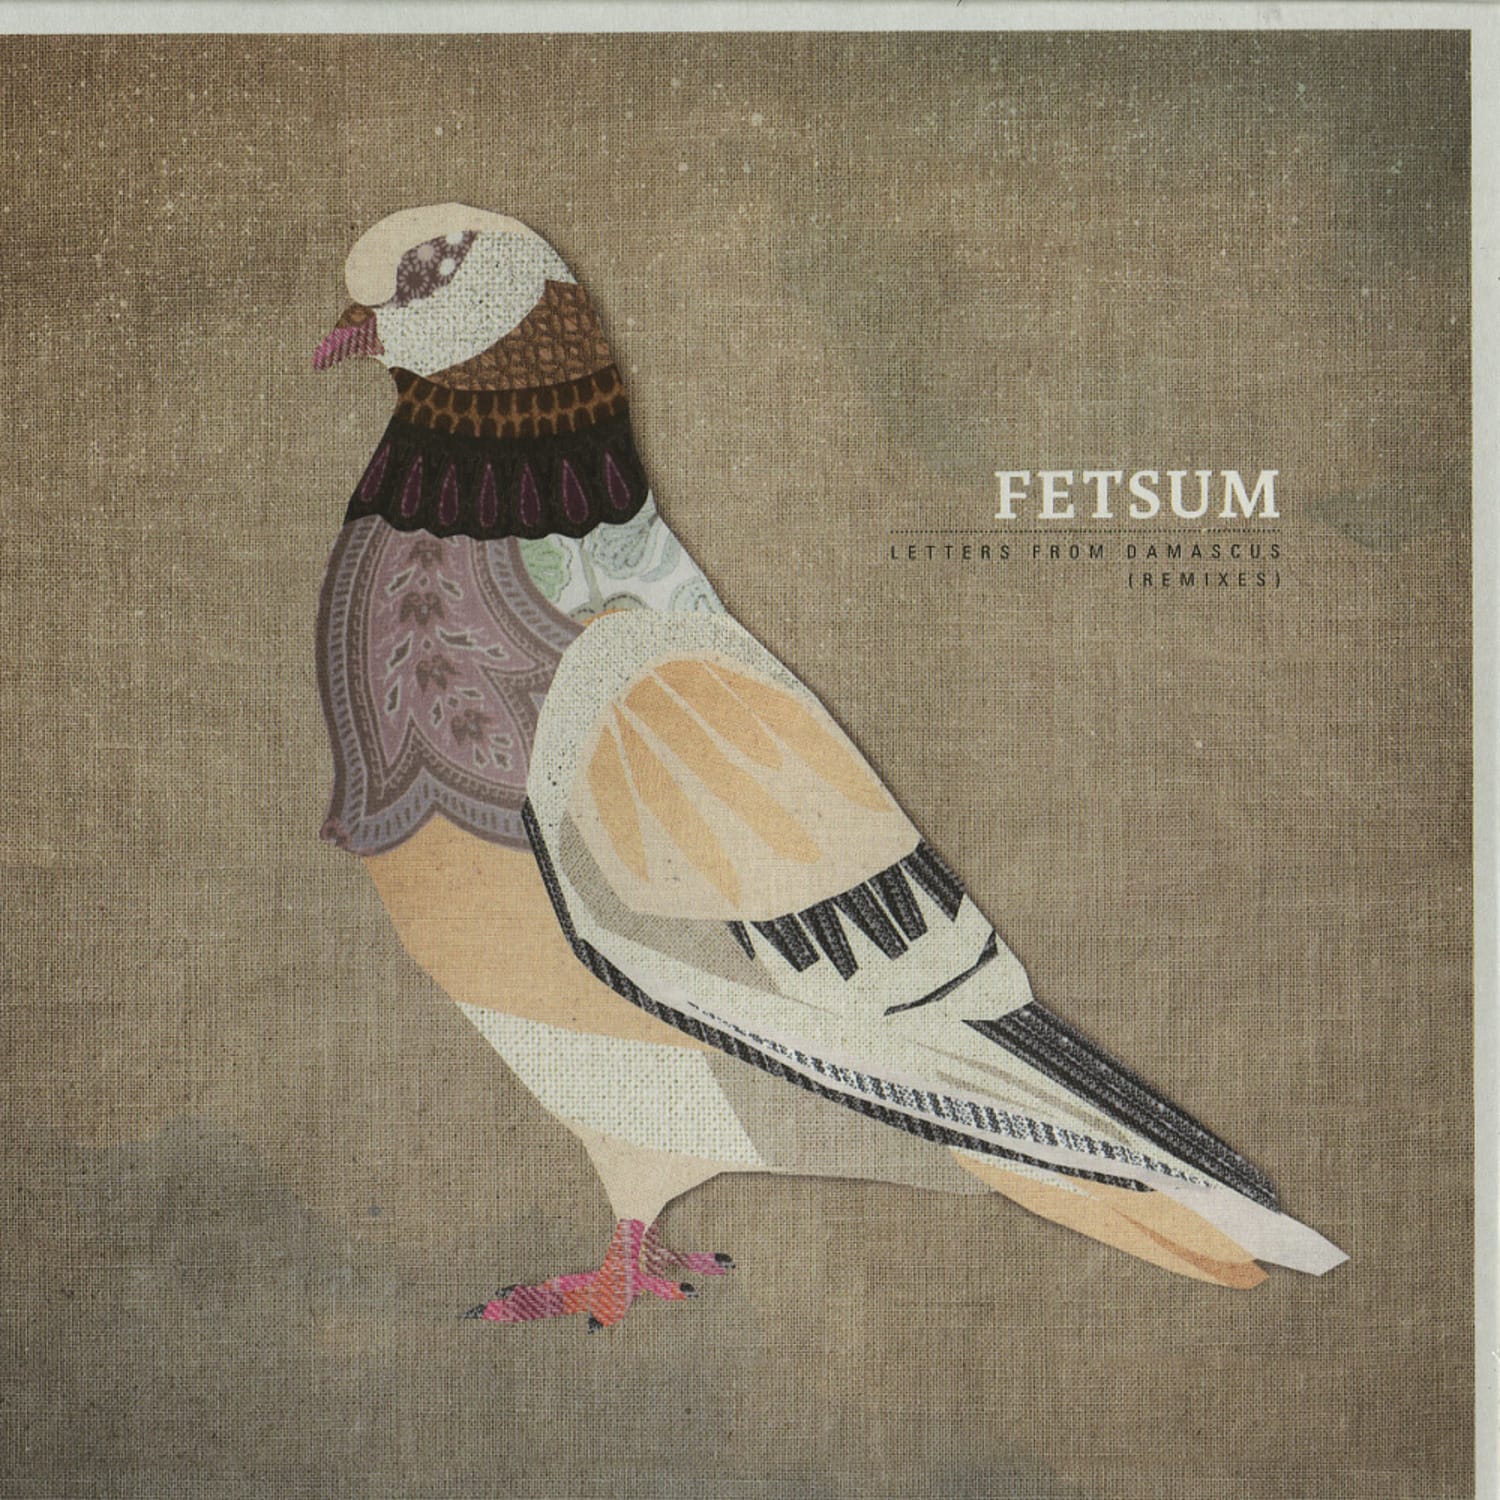 Fetsum - LETTERS FROM DAMASCUS REMIXES